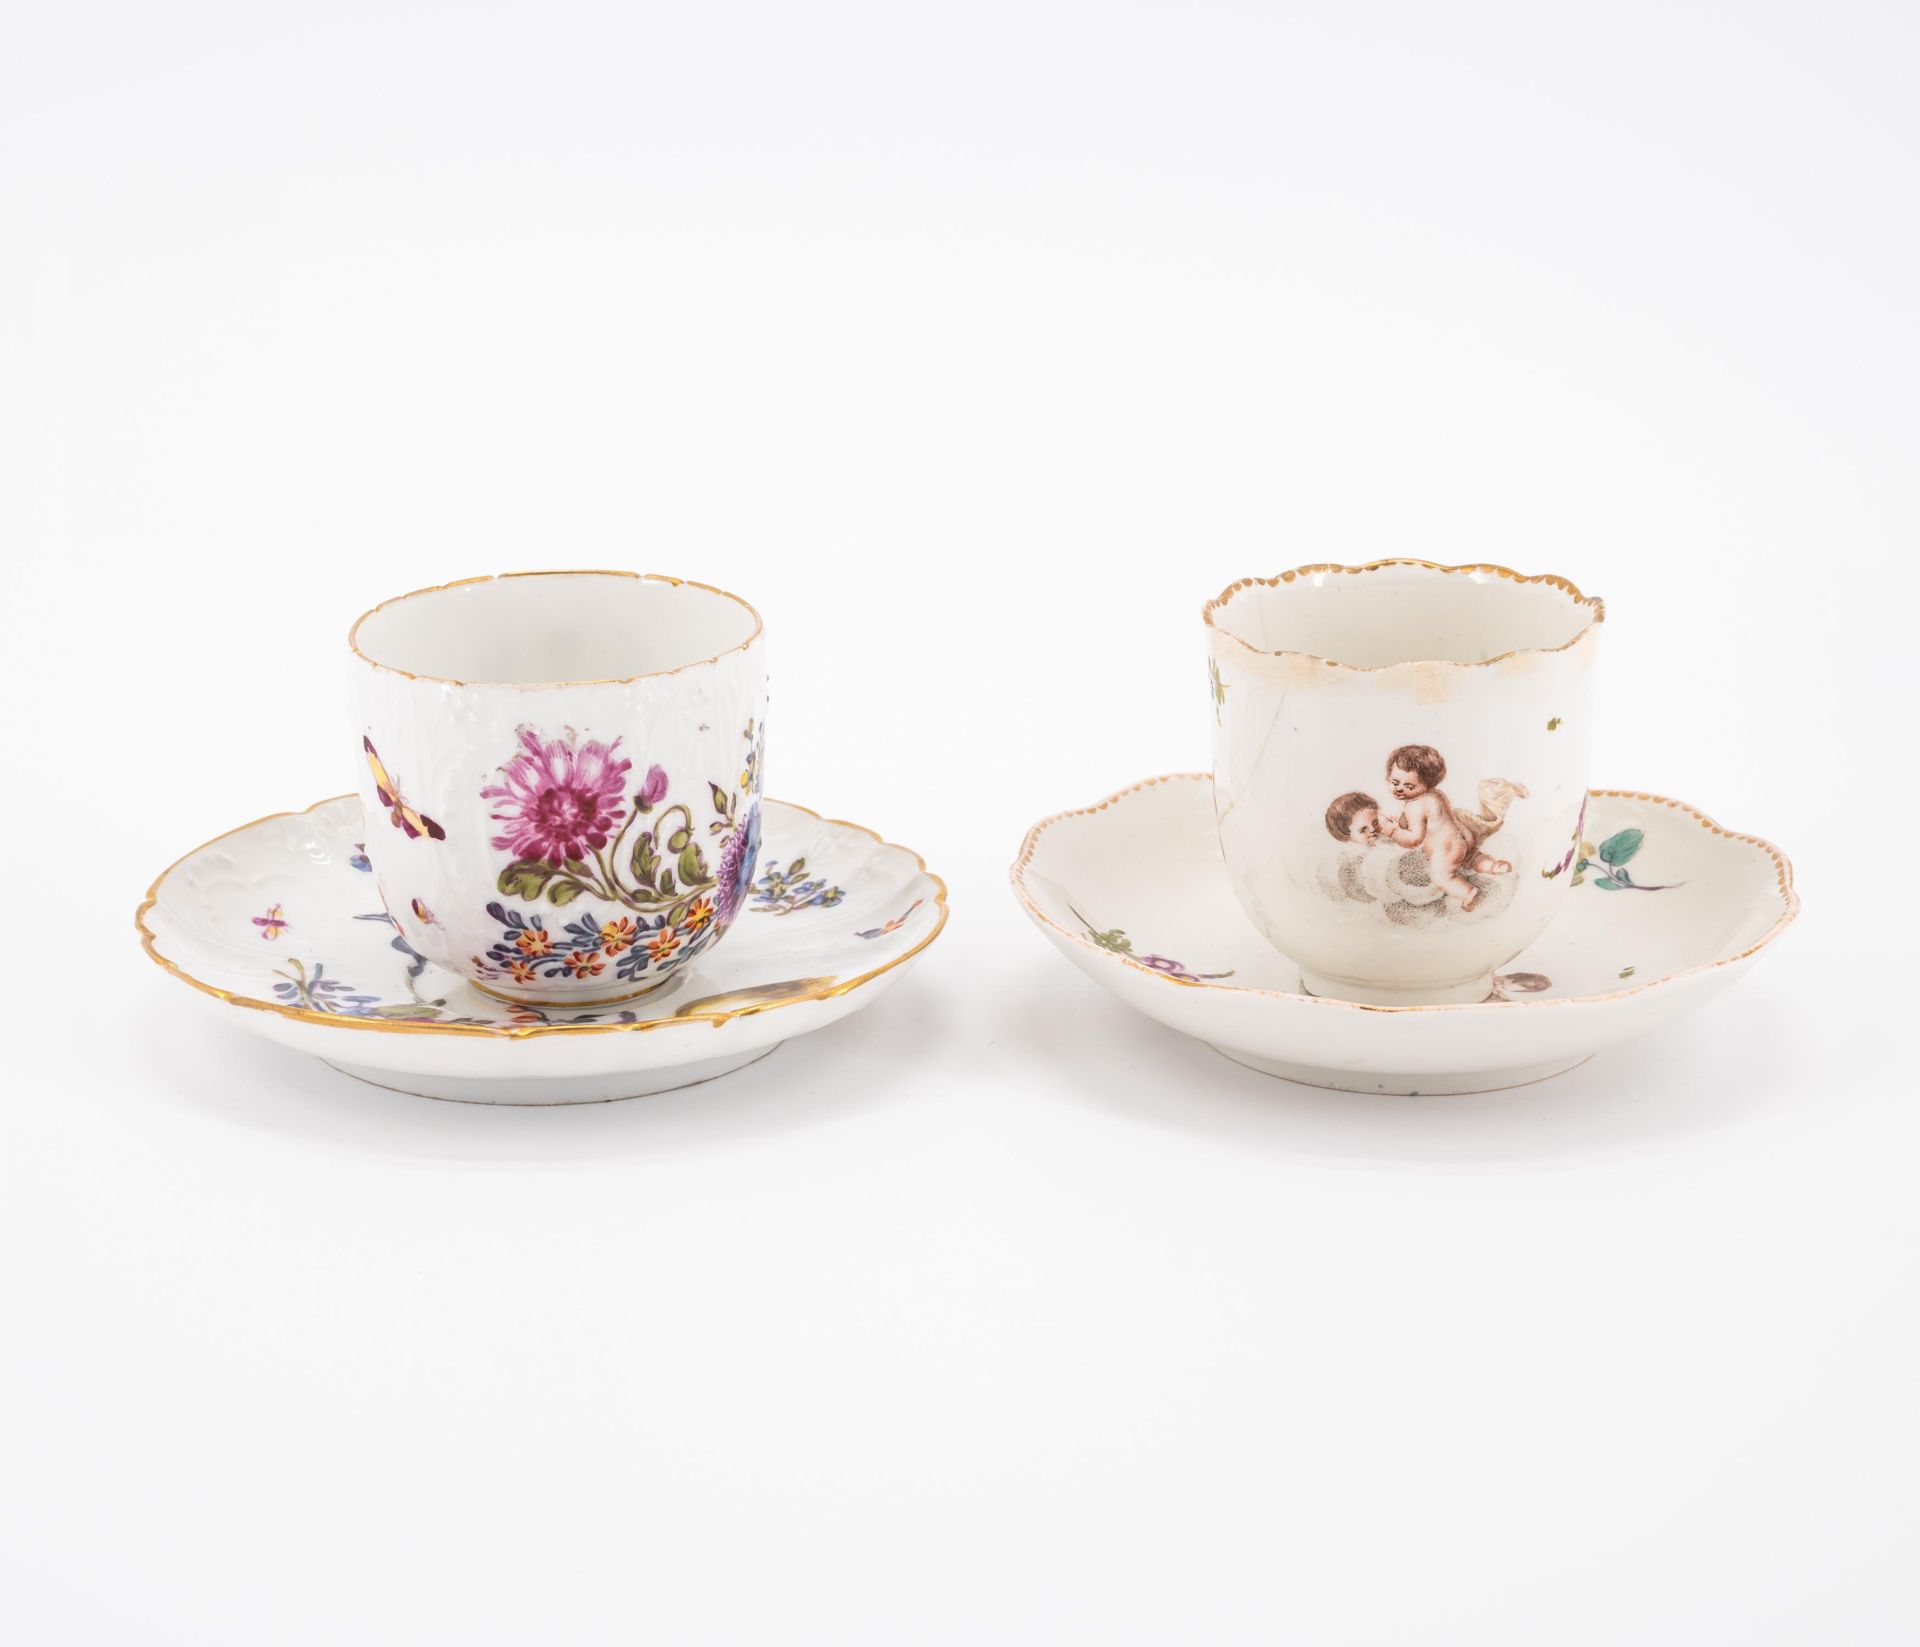 PORCELAIN SLOP BOWL, THREE CUPS AND SAUCERS WITH FIGURATIVE AND FLORAL DECOR - Image 4 of 22